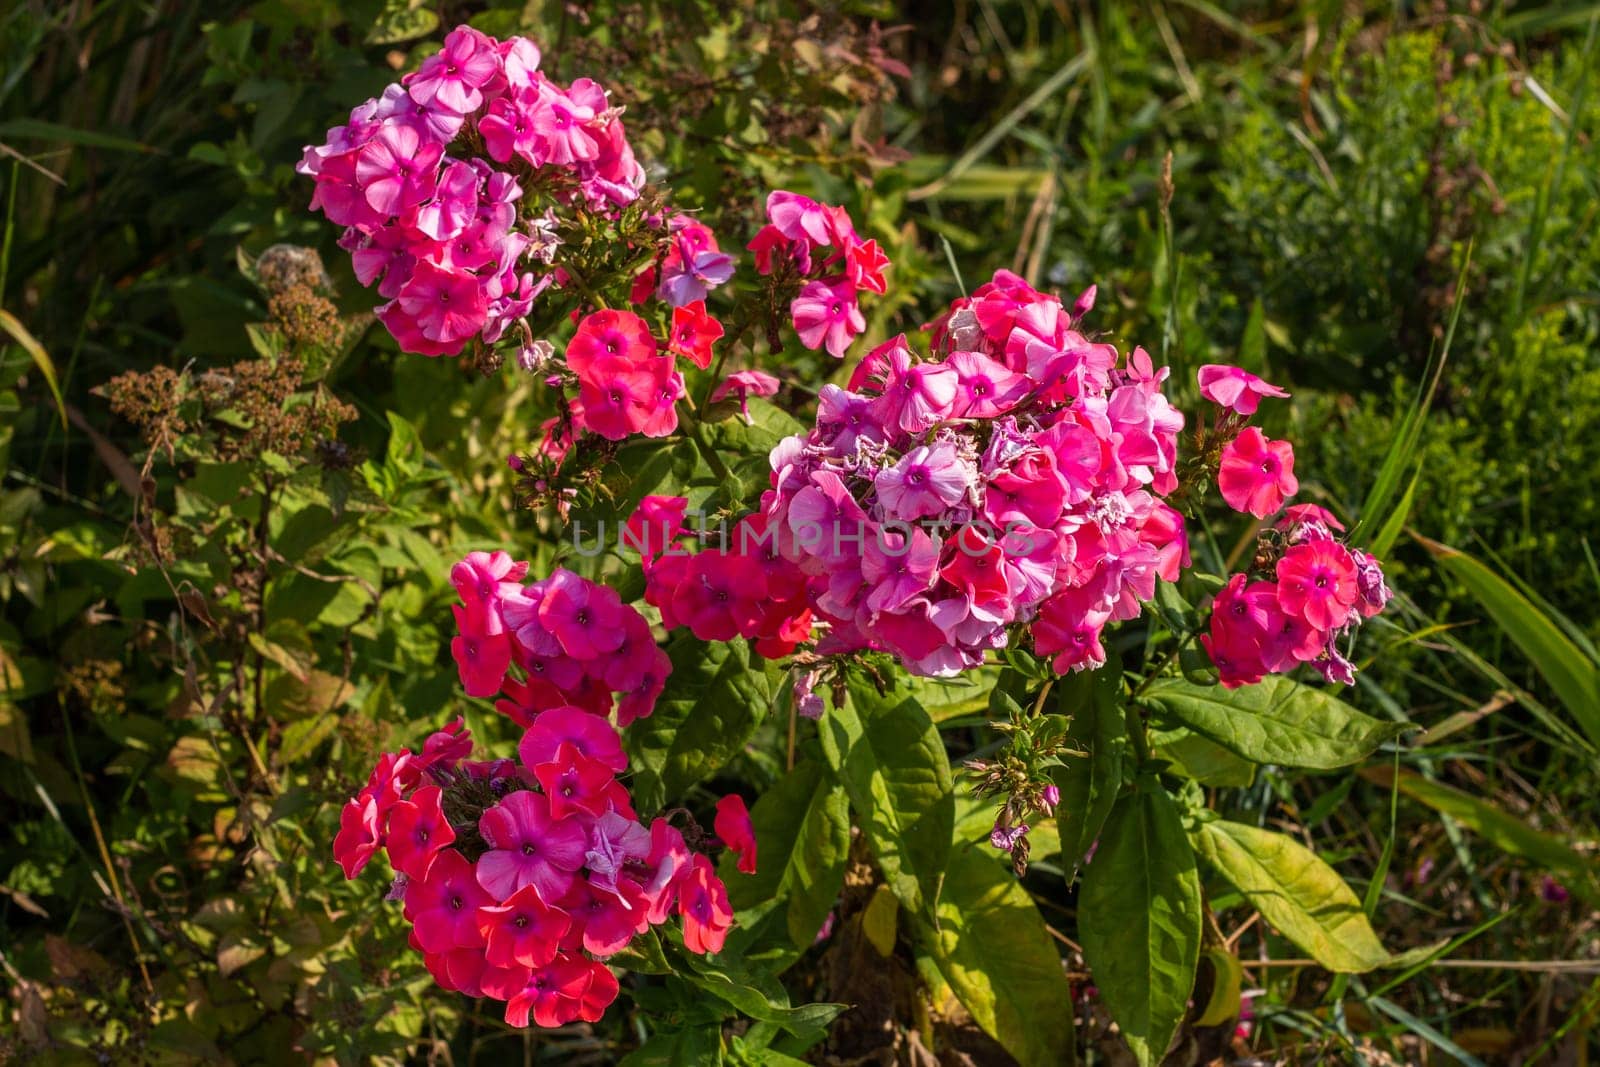 Pink flowers on a flowerbed of phlox. Bouquets and flower cutting. Flower garden. A perennial plant.